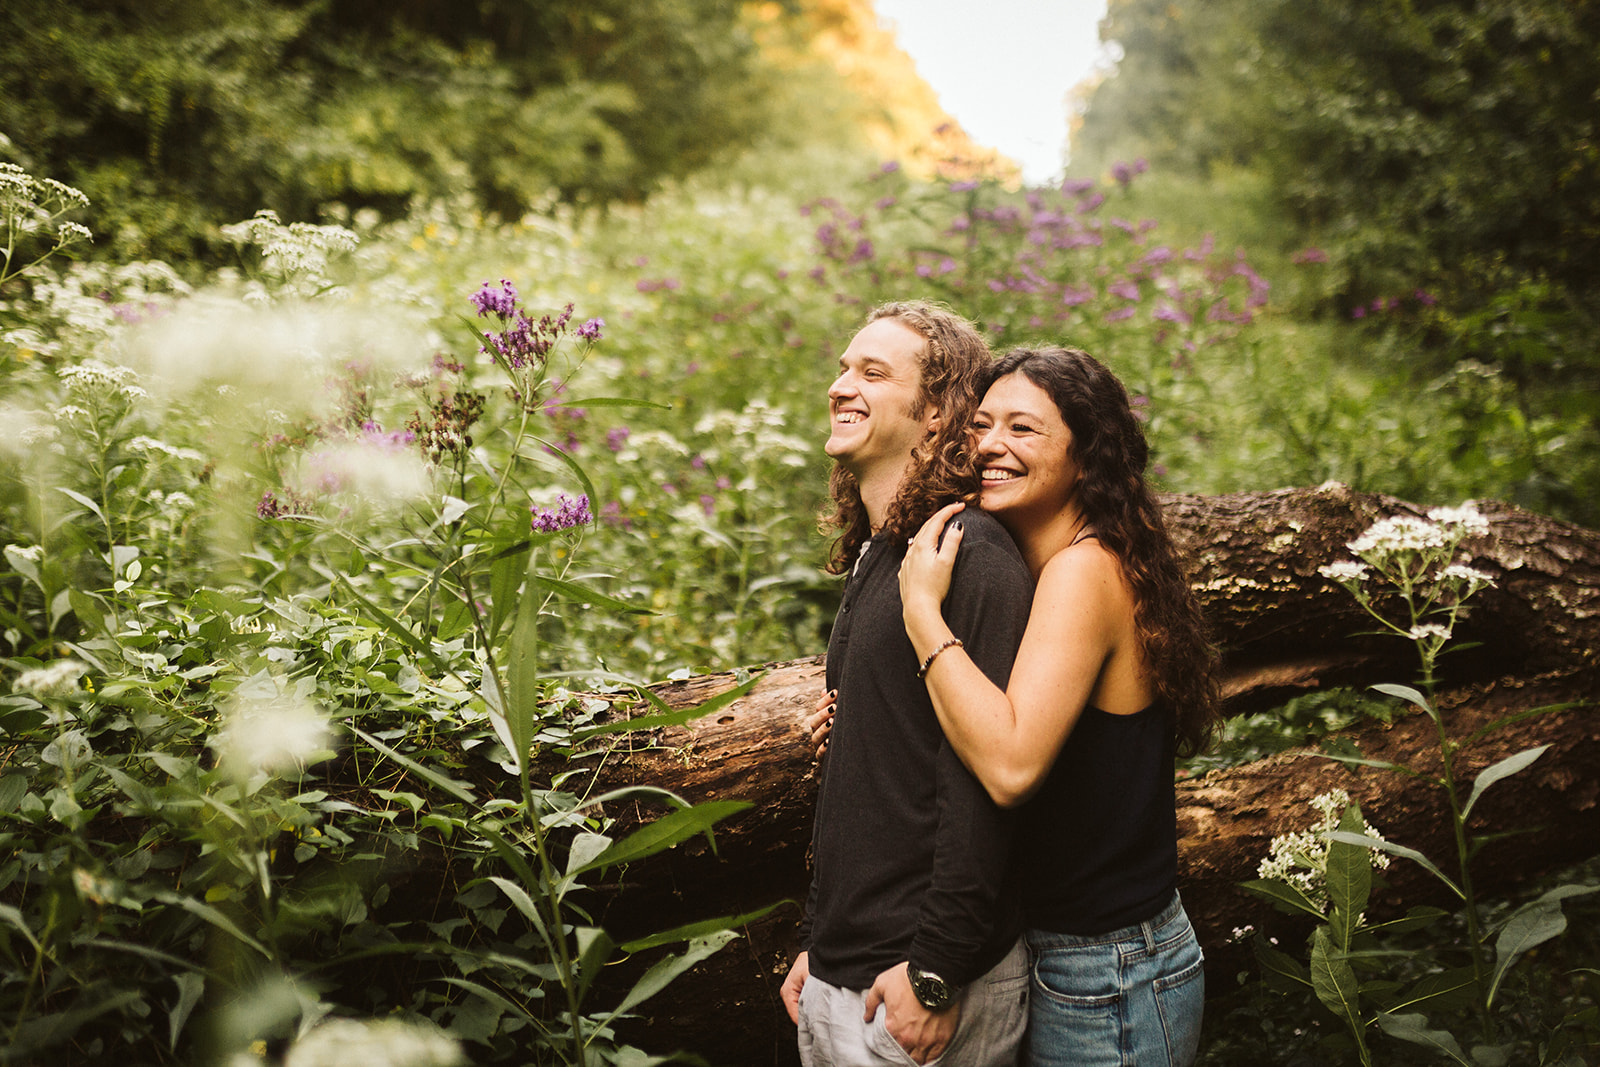 A woman hugs her fiance from behind in a field of wildflowers while they stand for an engagement photo pose.